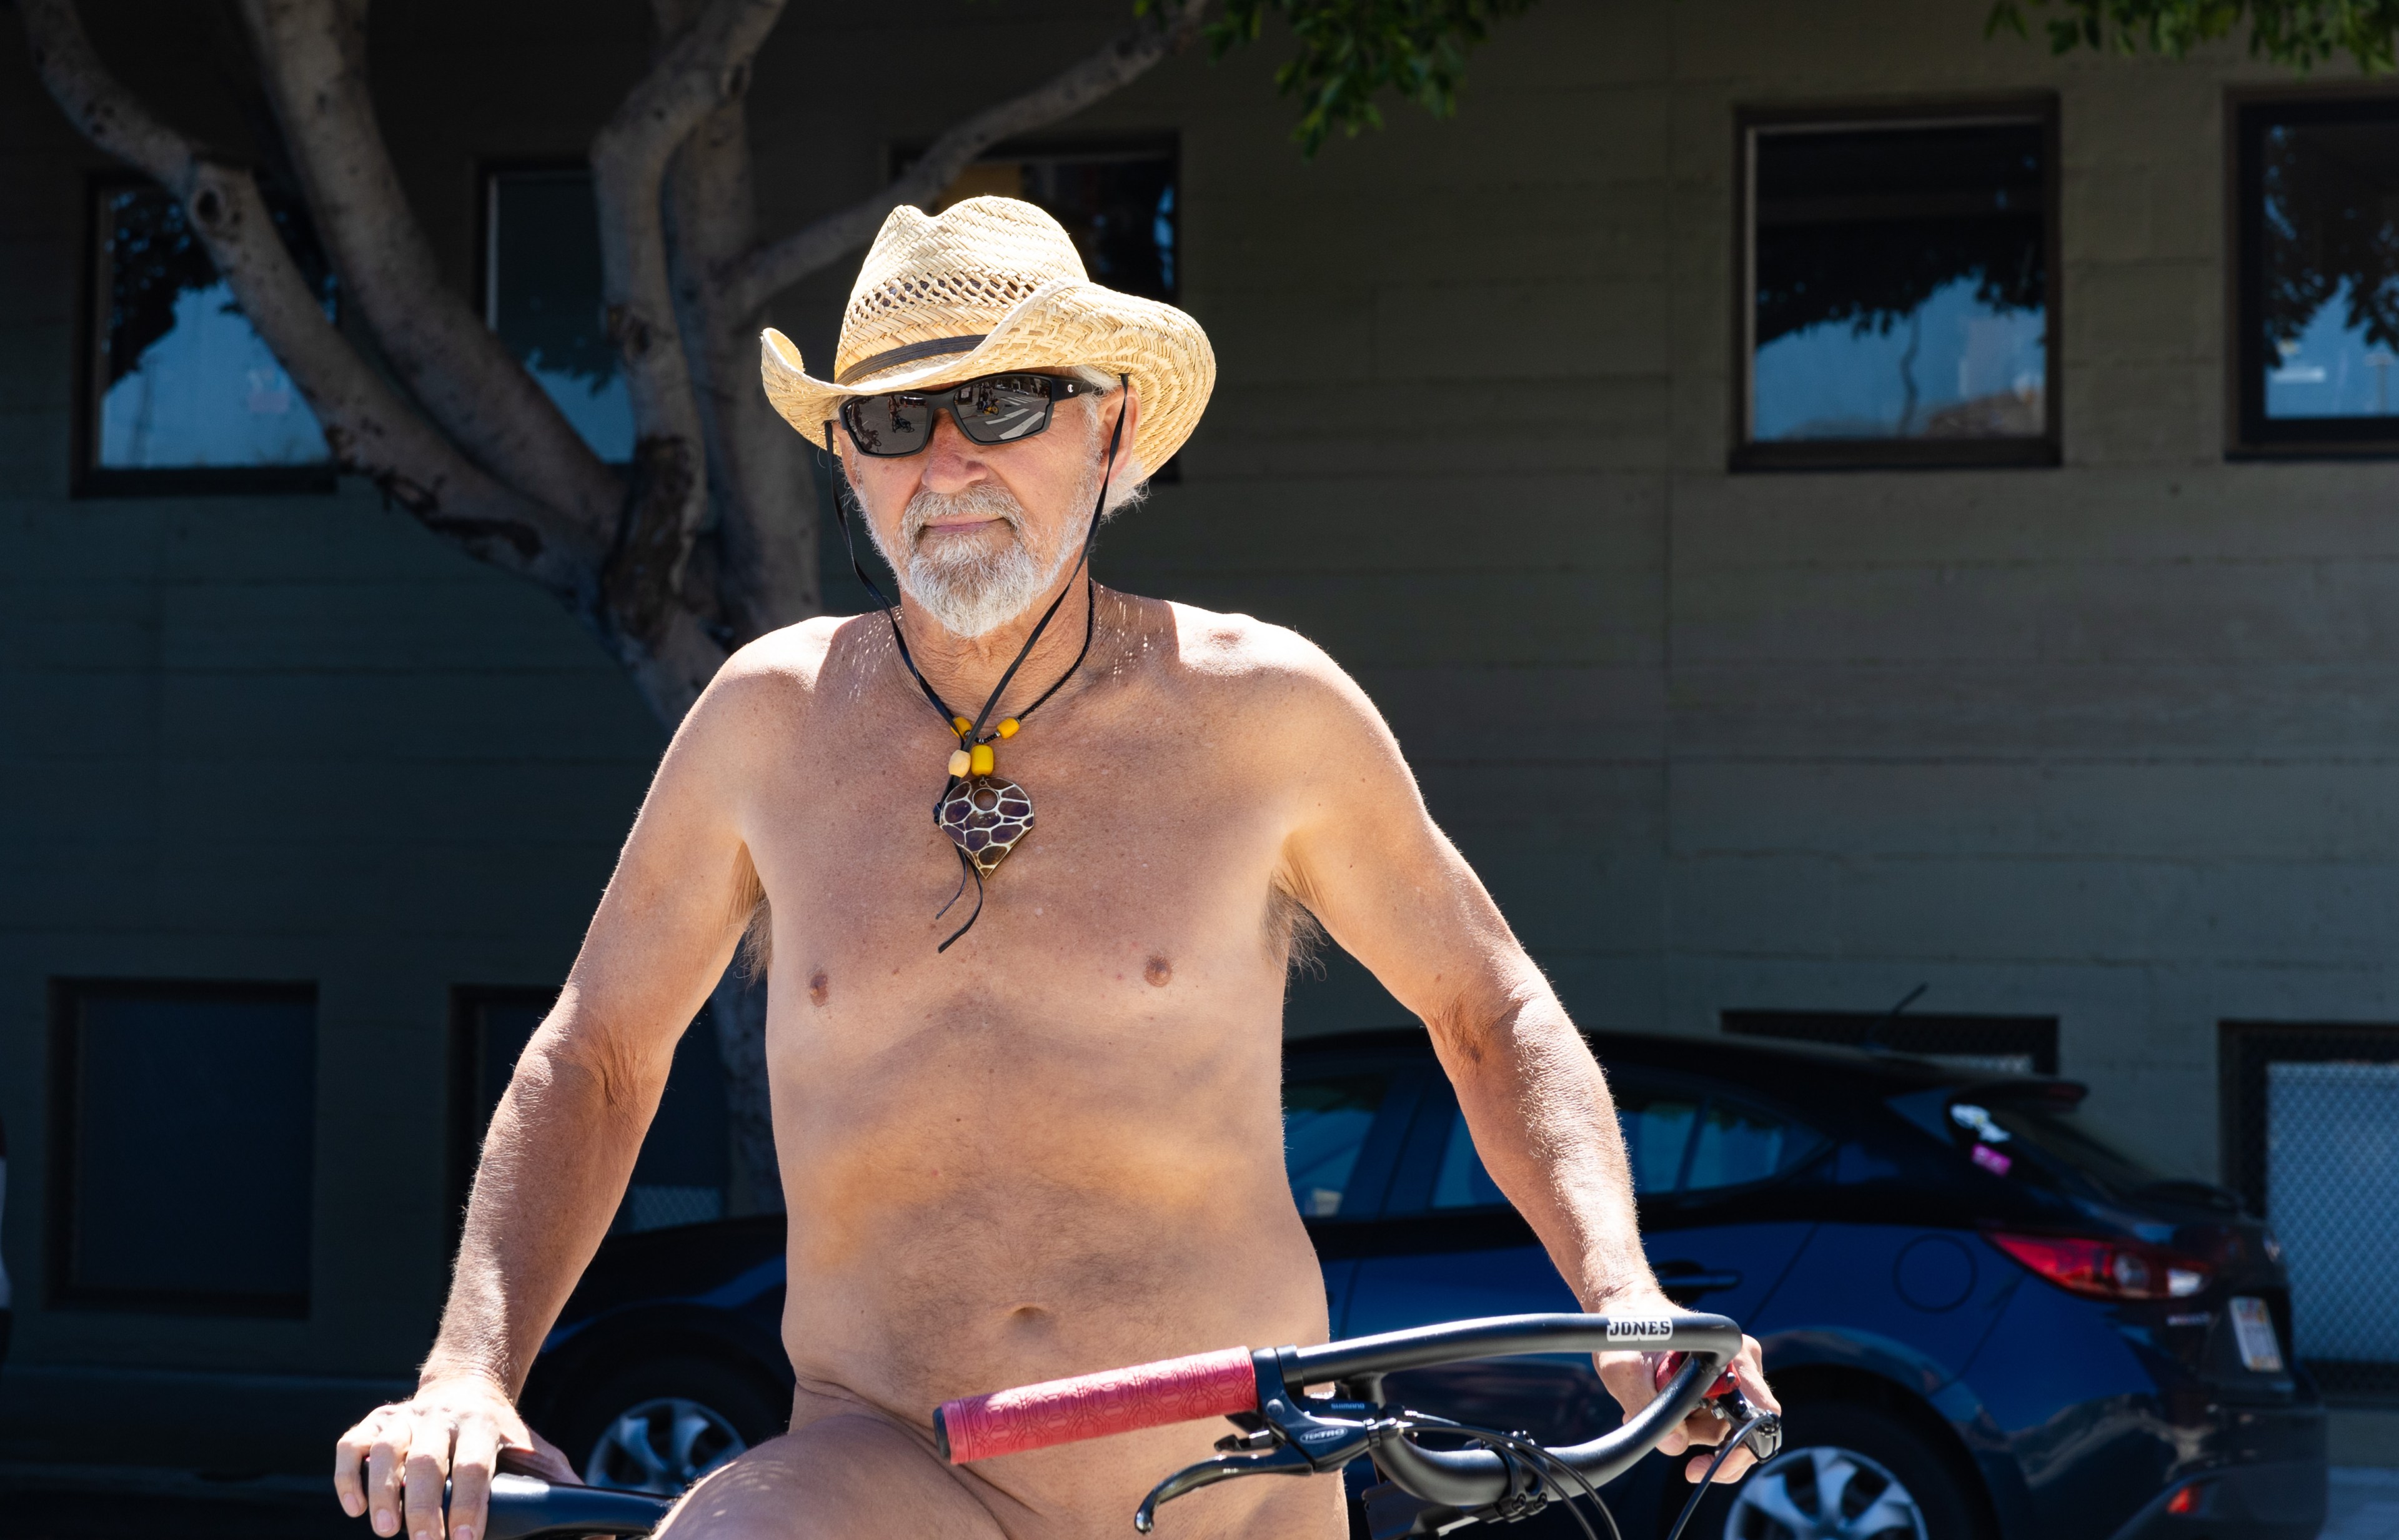 A person with a straw hat and sunglasses is sitting on a bike, shirtless, with a building and a car in the background.